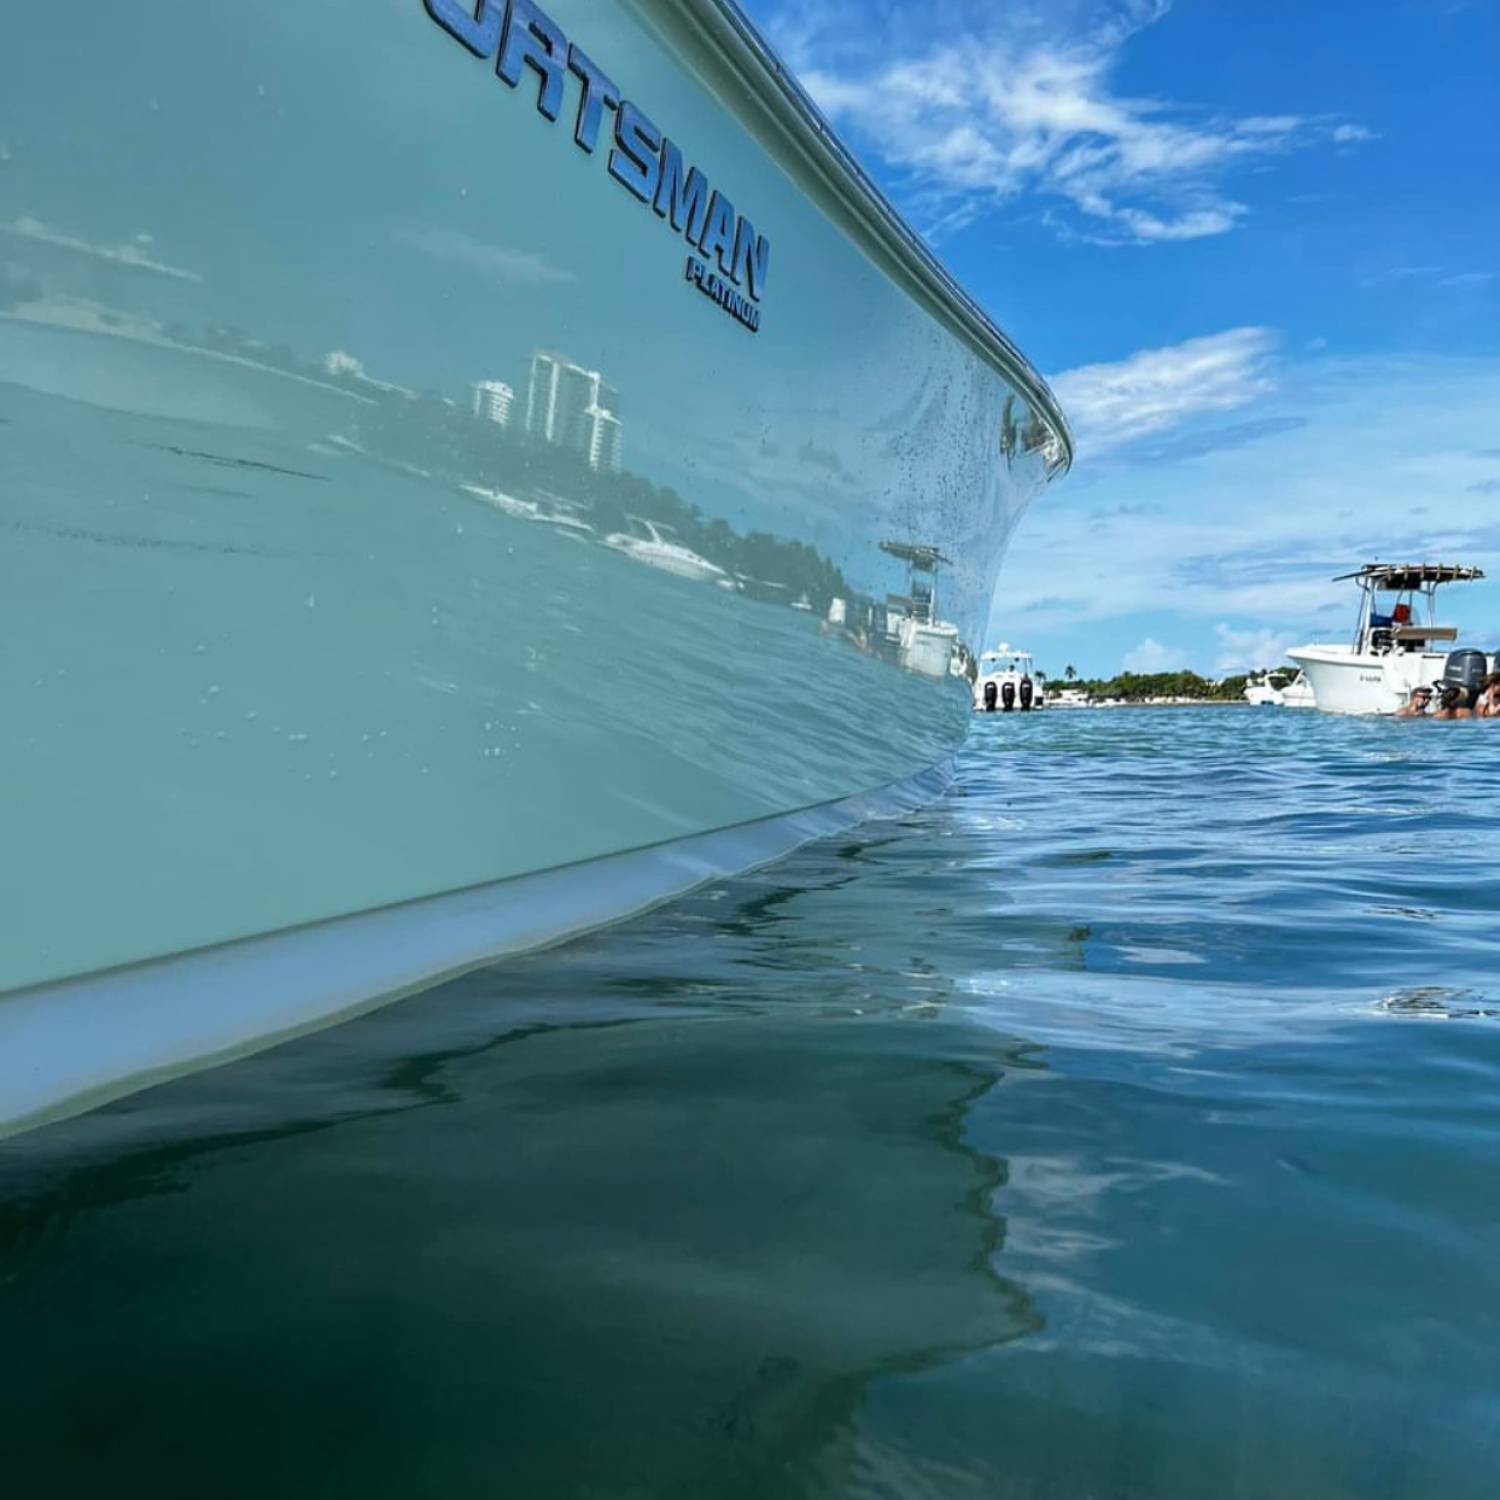 Title: Sandbar - On board their Sportsman Heritage 231 Center Console - Location: Houlover Fl. Participating in the Photo Contest #SportsmanJune2024